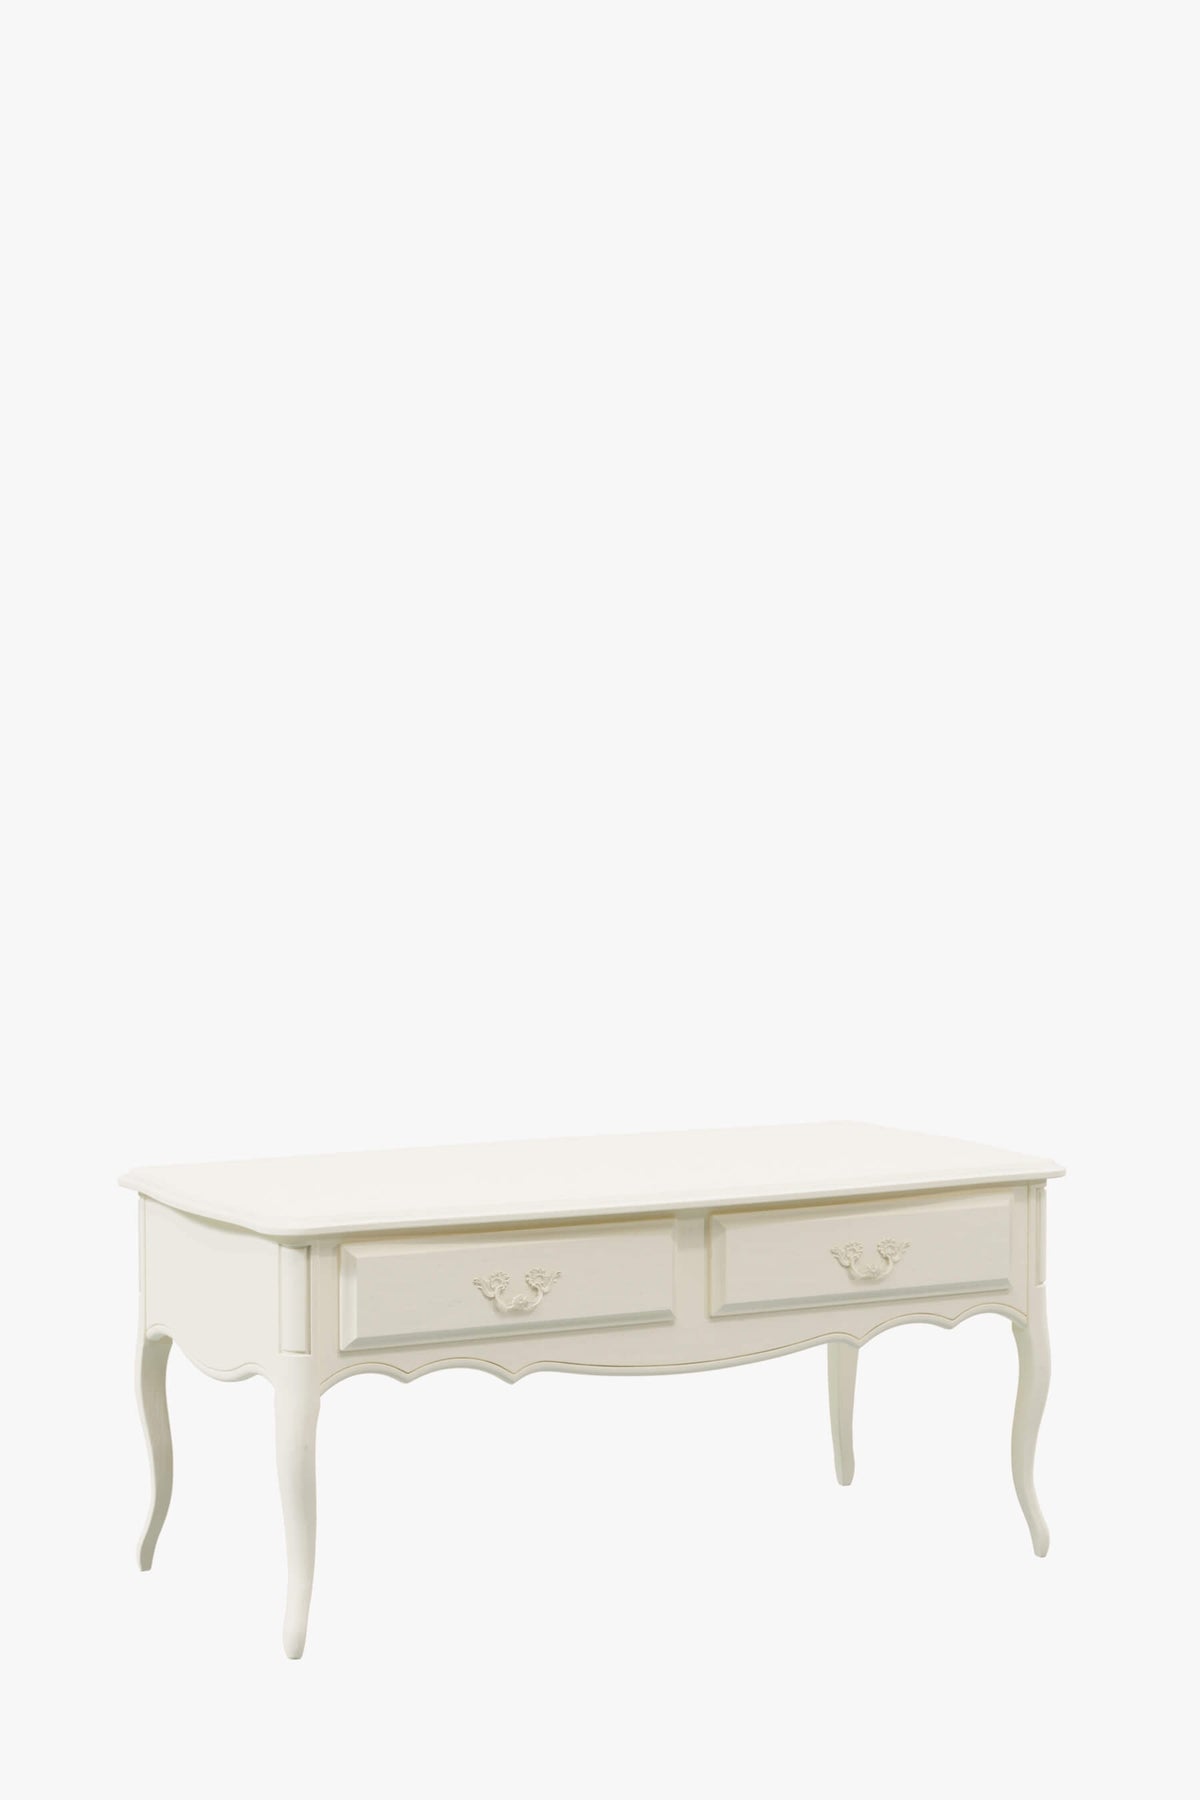 Provencale 2 Drawer Coffee Table